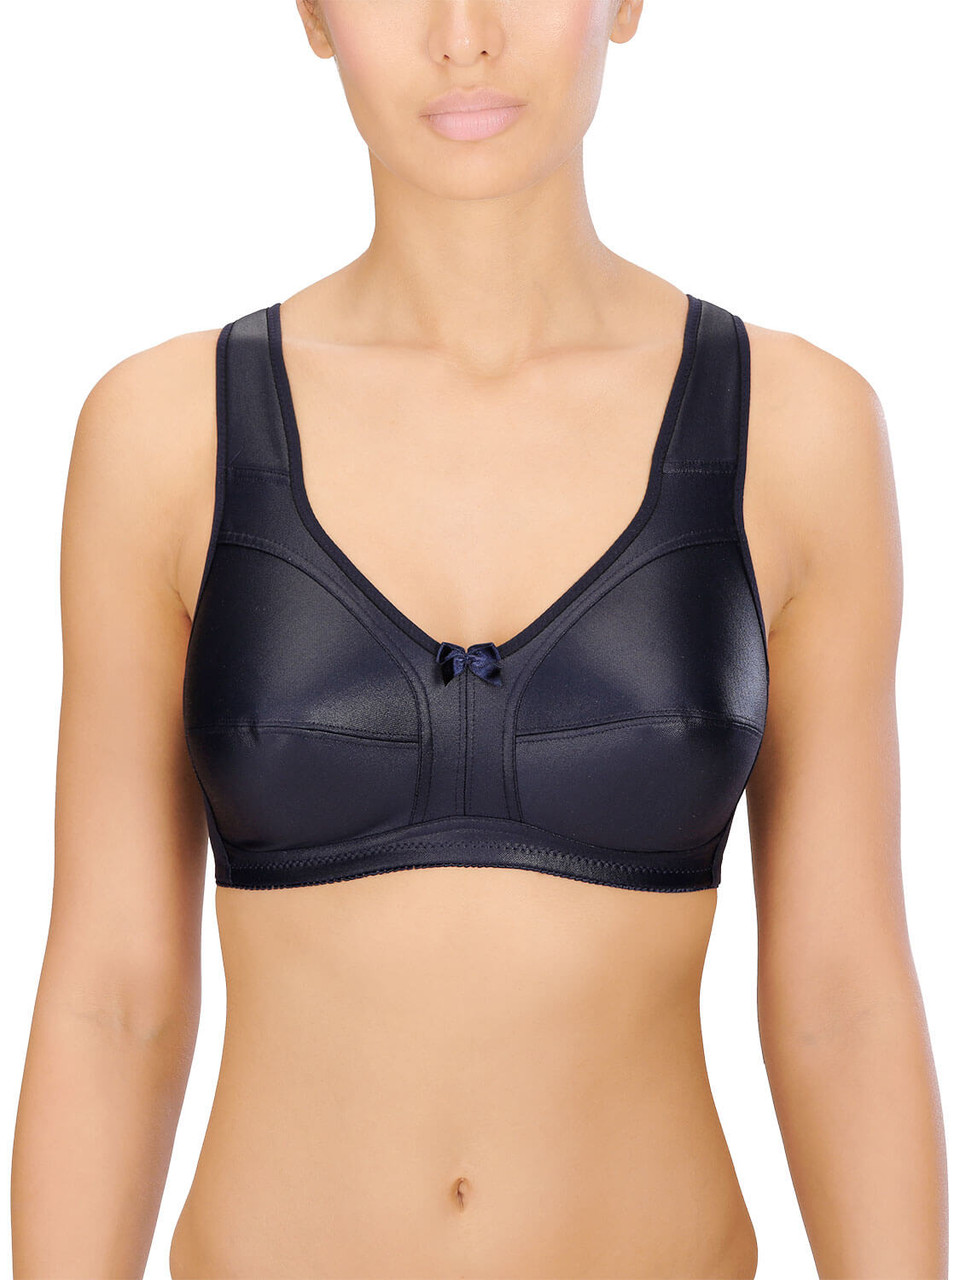 Wireless Soft Cup Moulded Full Support Cotton Bra by Naturana 5101